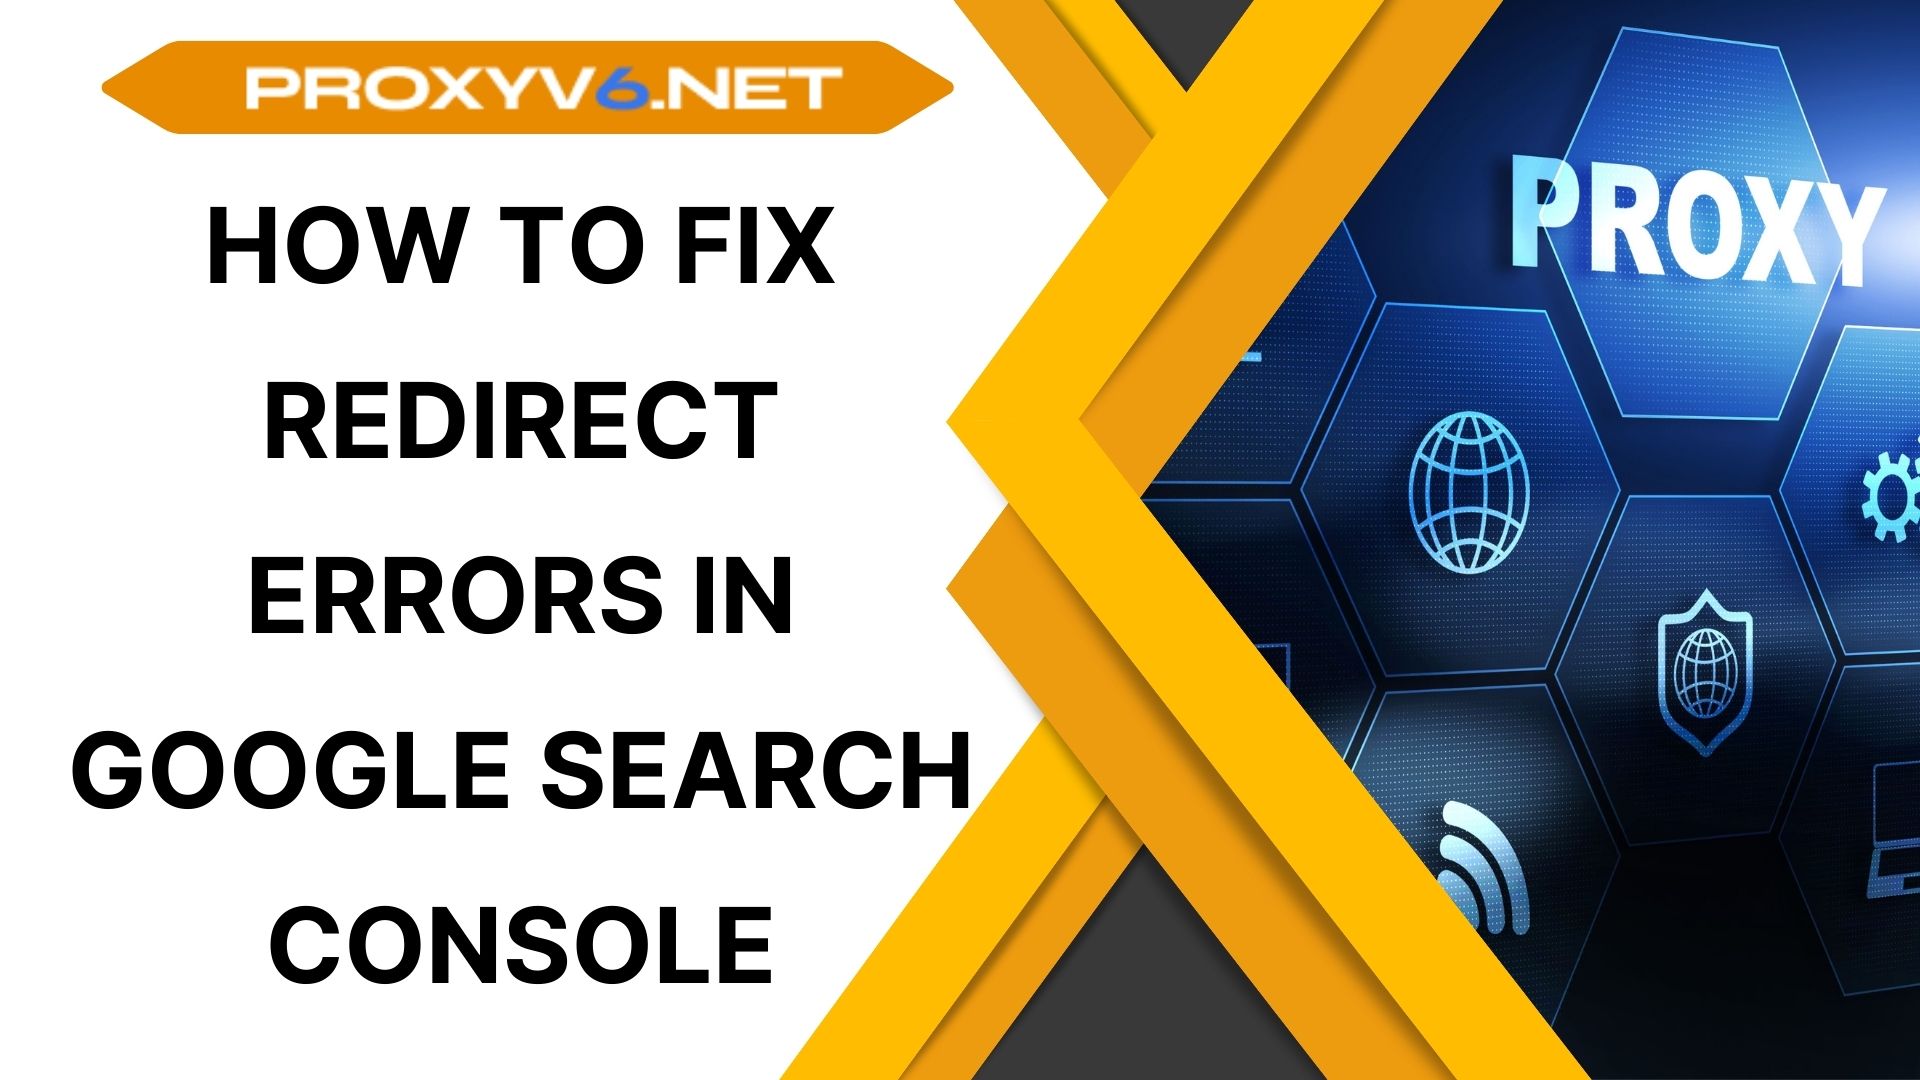 How to Fix Redirect Errors in Google Search Console